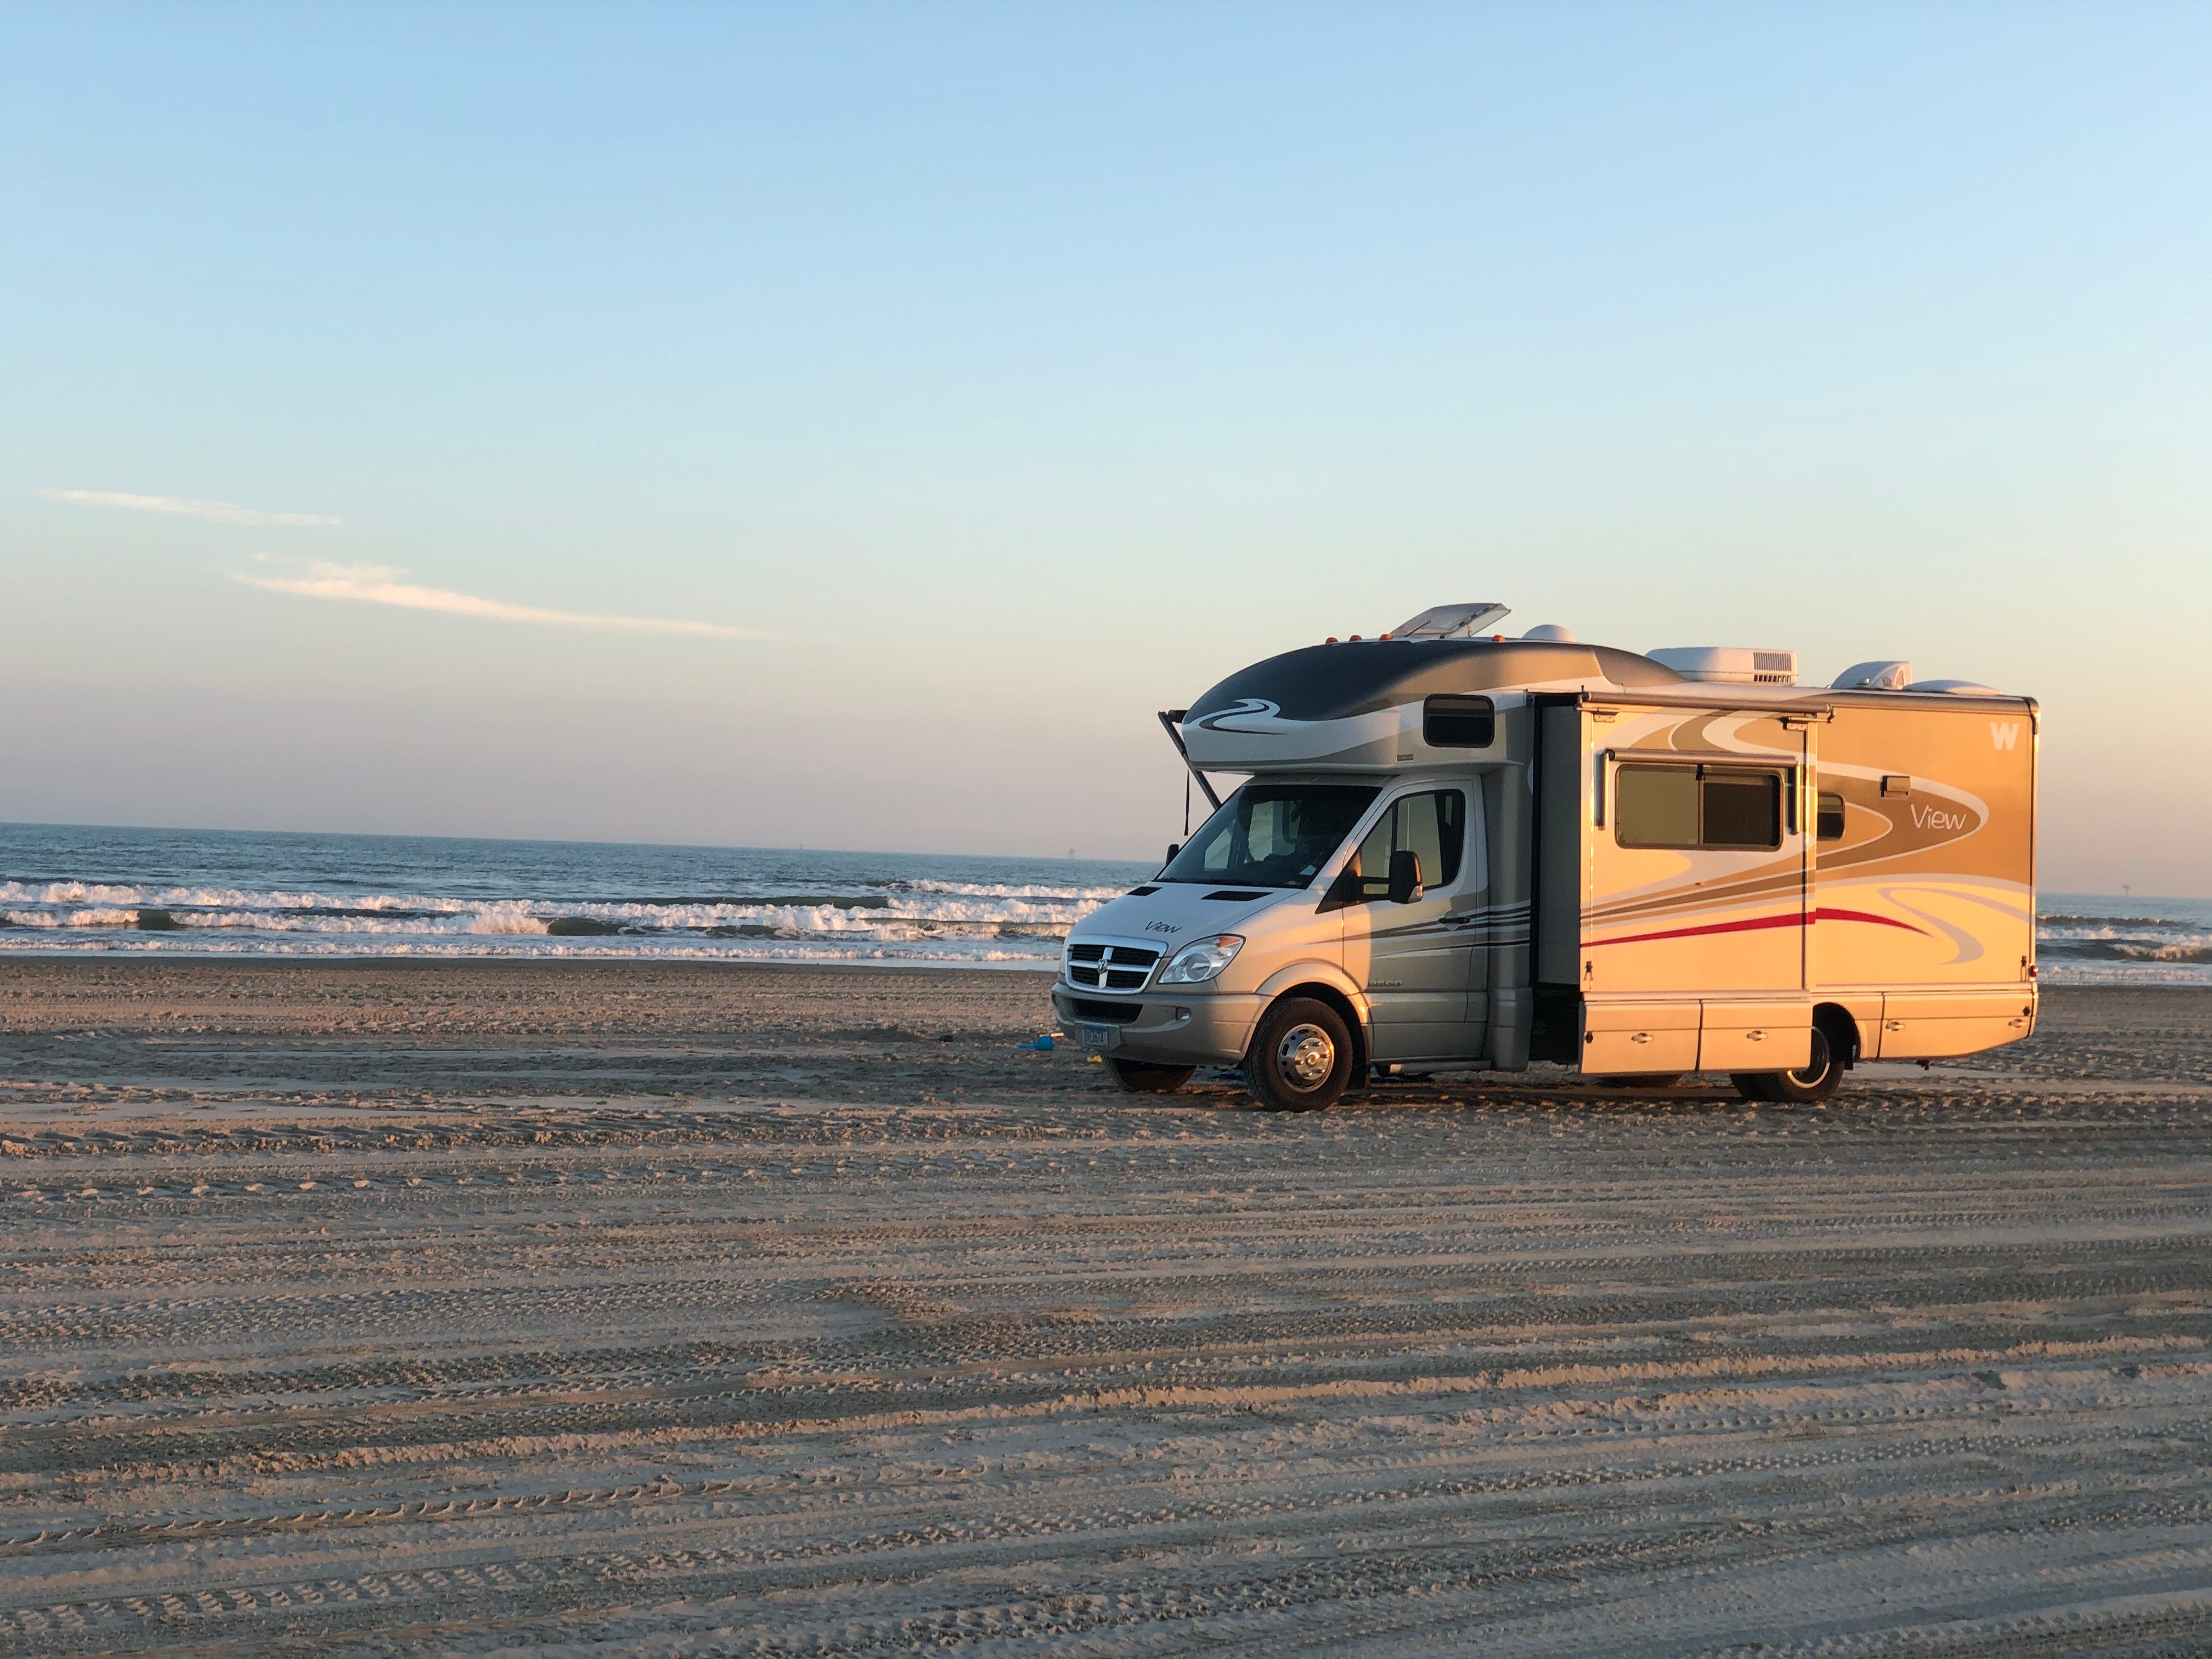 Camper submitted image from Port Aransas Permit Beach - 1